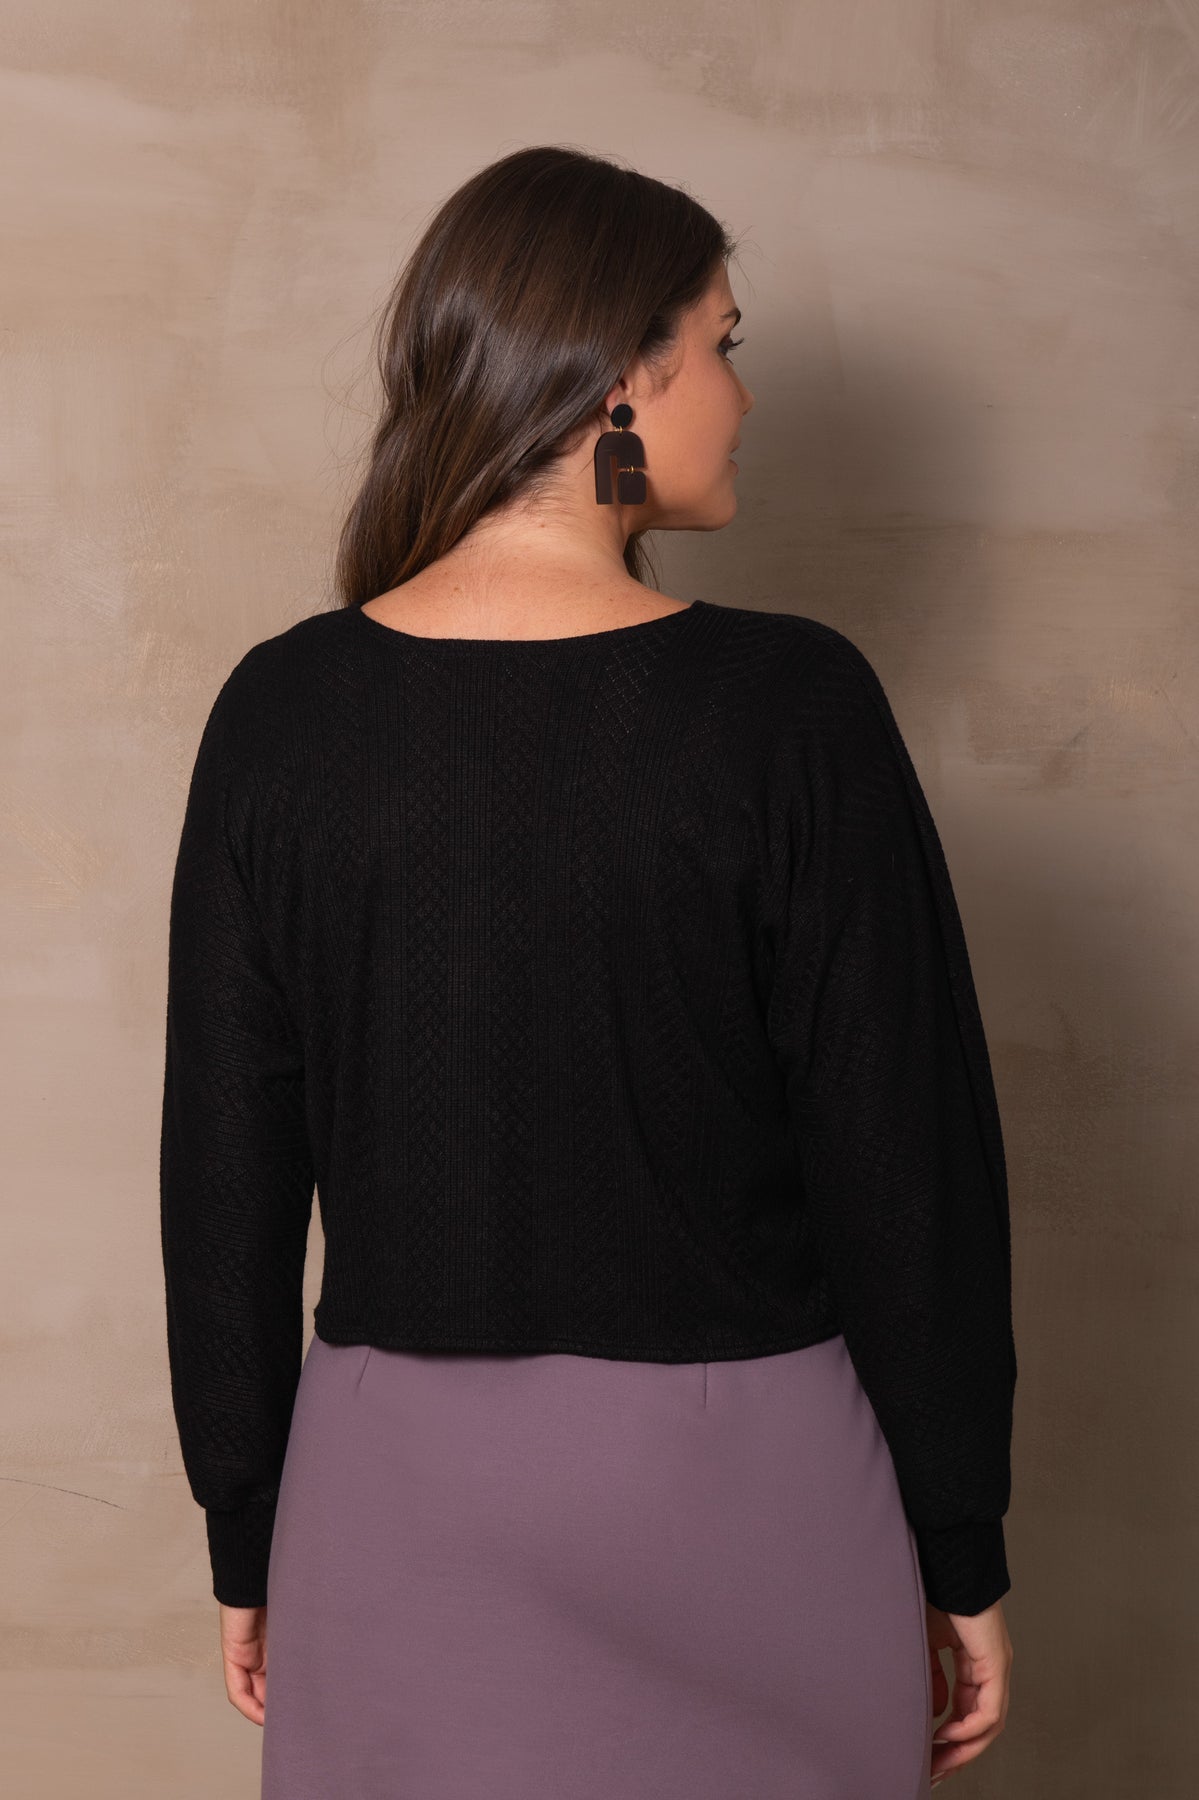 Flore Sweater by Cherry Bobin, Black, back view, bamboo/cotton fleece, eco-fabric, slightly cropped, gently puffed long sleeves, sizes XS to 3XL, made in Montreal